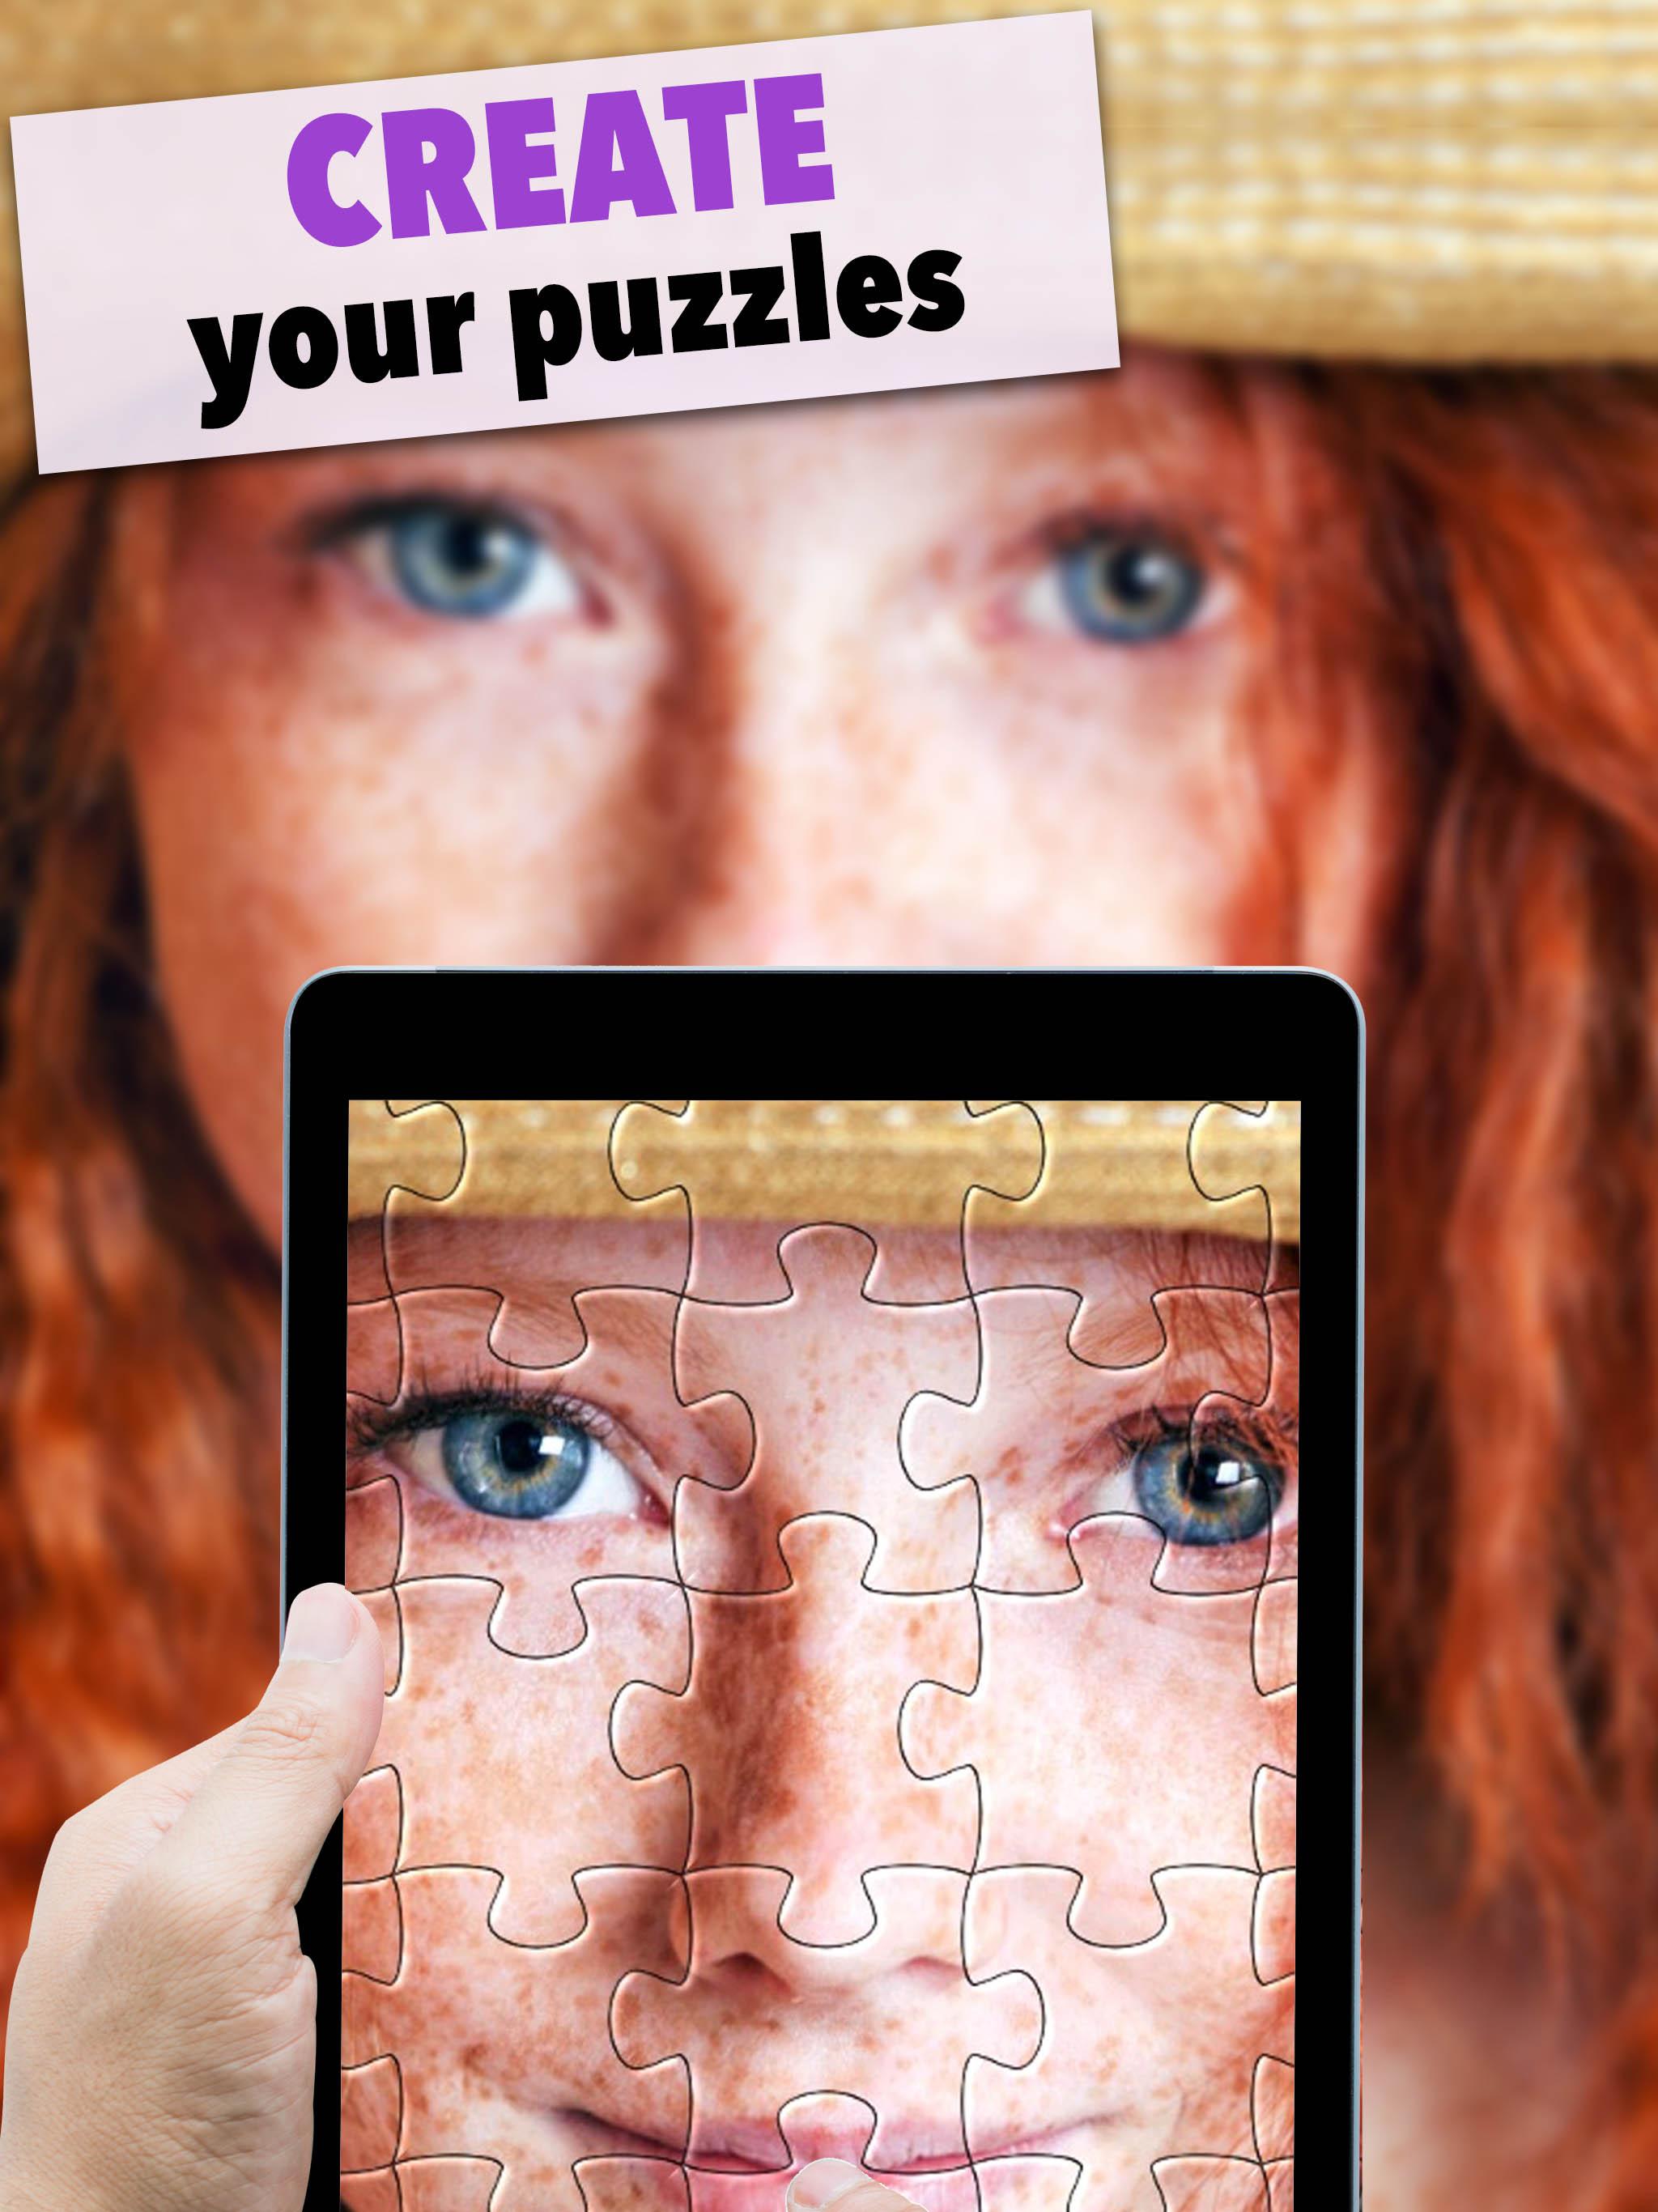 World of Puzzles - best free jigsaw puzzle games 1.16 Screenshot 10